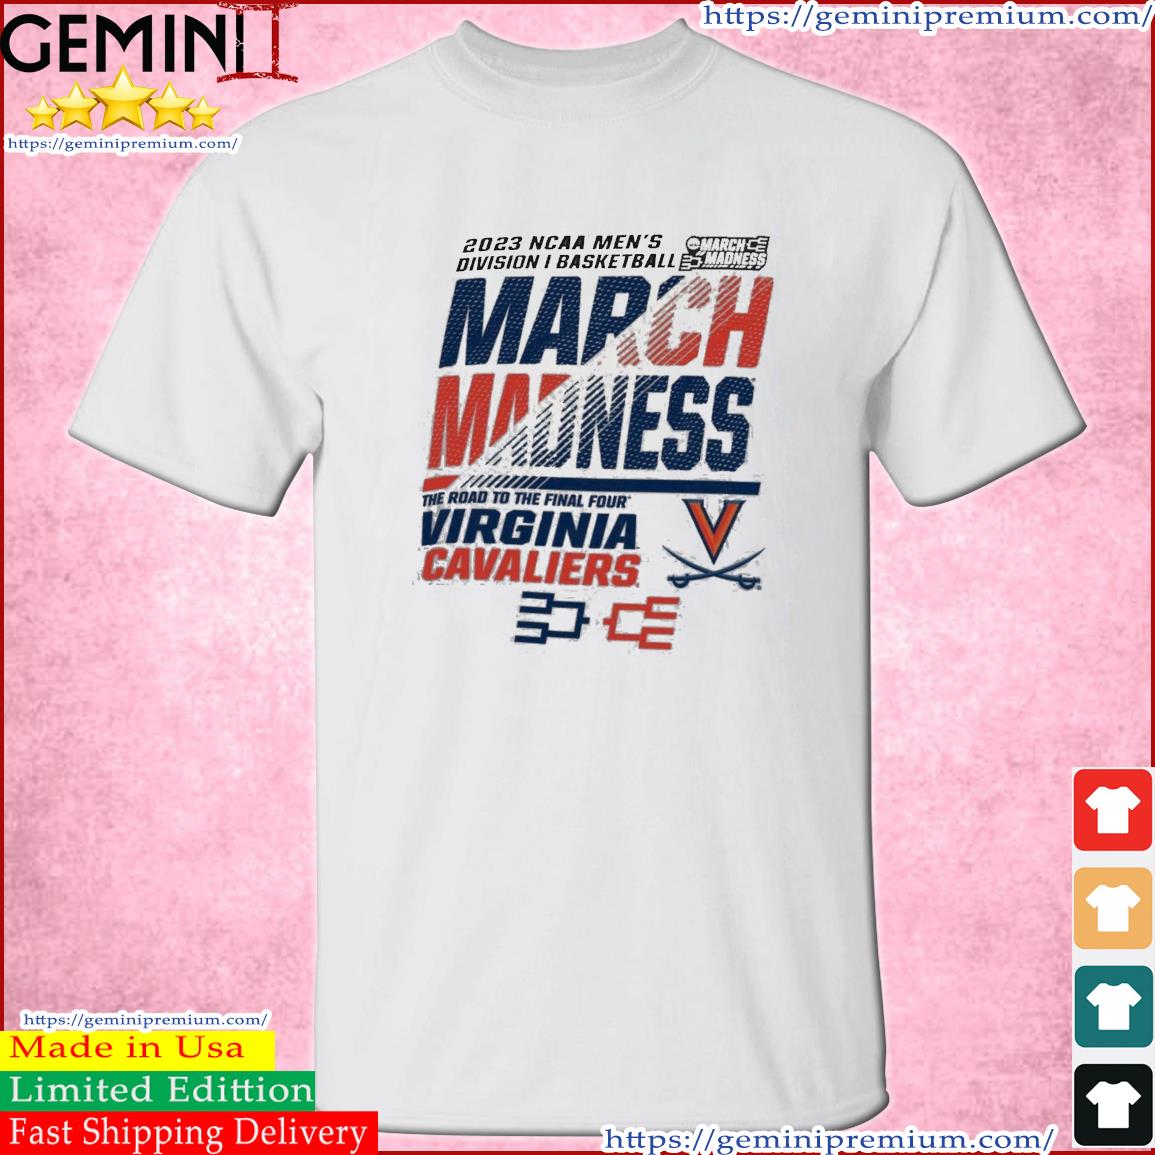 Virginia Cavaliers Men's Basketball 2023 NCAA March Madness The Road To Final Four Shirt